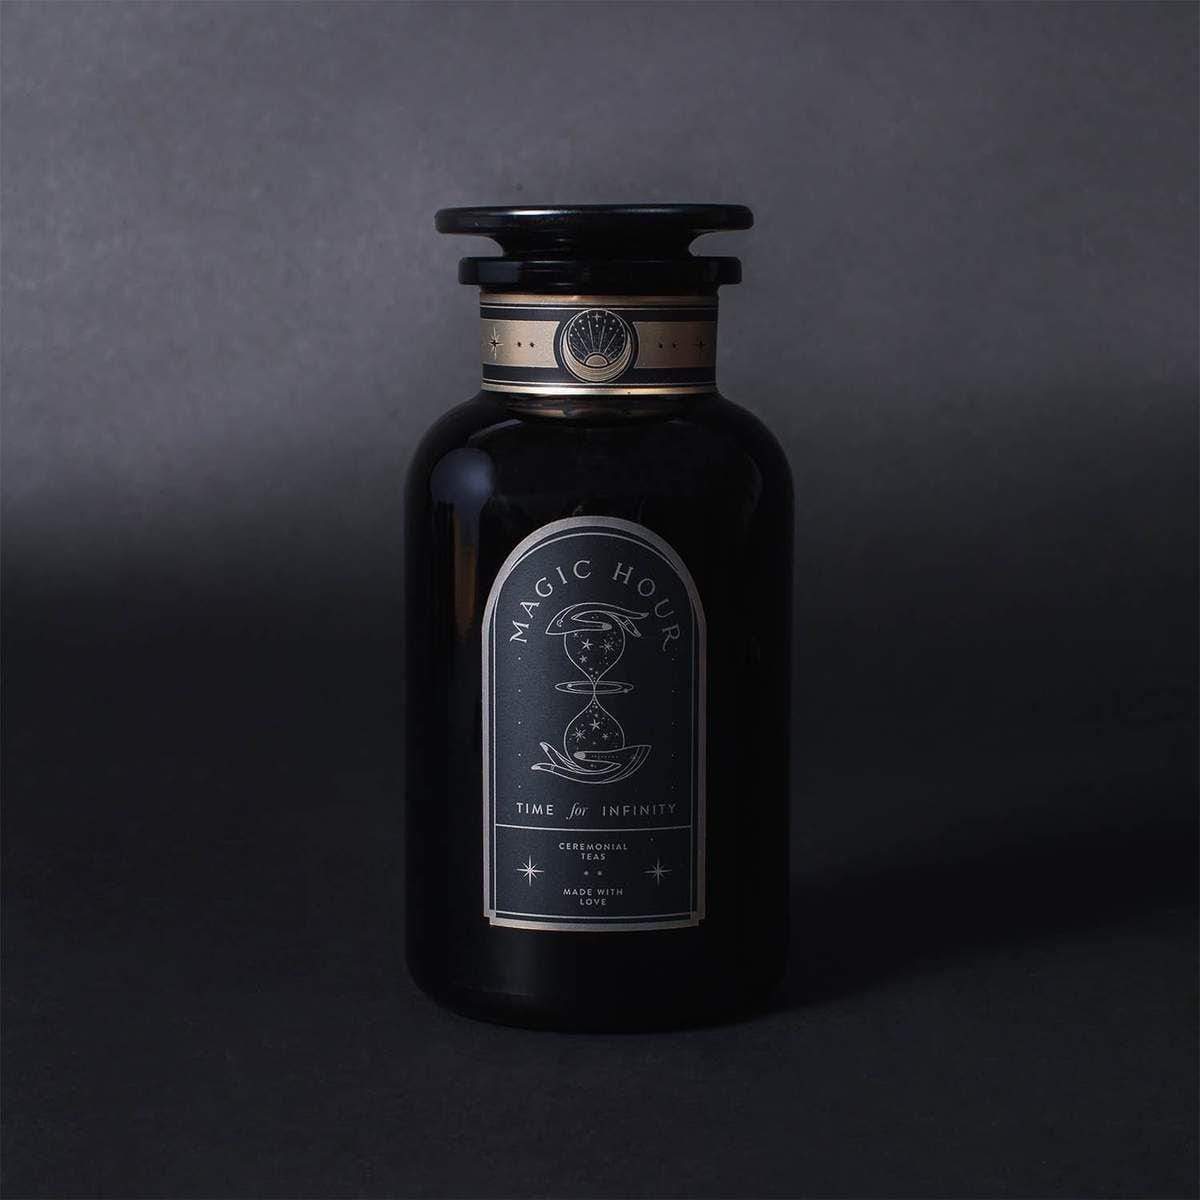 A dark glass bottle with a black label marked "Magic Hour" and illustrations, boasting the text "Time & Infinity." The bottle, reminiscent of Magic Hour's refined tea blend Ti Quan Yin Oolong: Tea of Patient Compassion, has an ornate design and a stopper on top. The background is a gradient of dark gray shades.